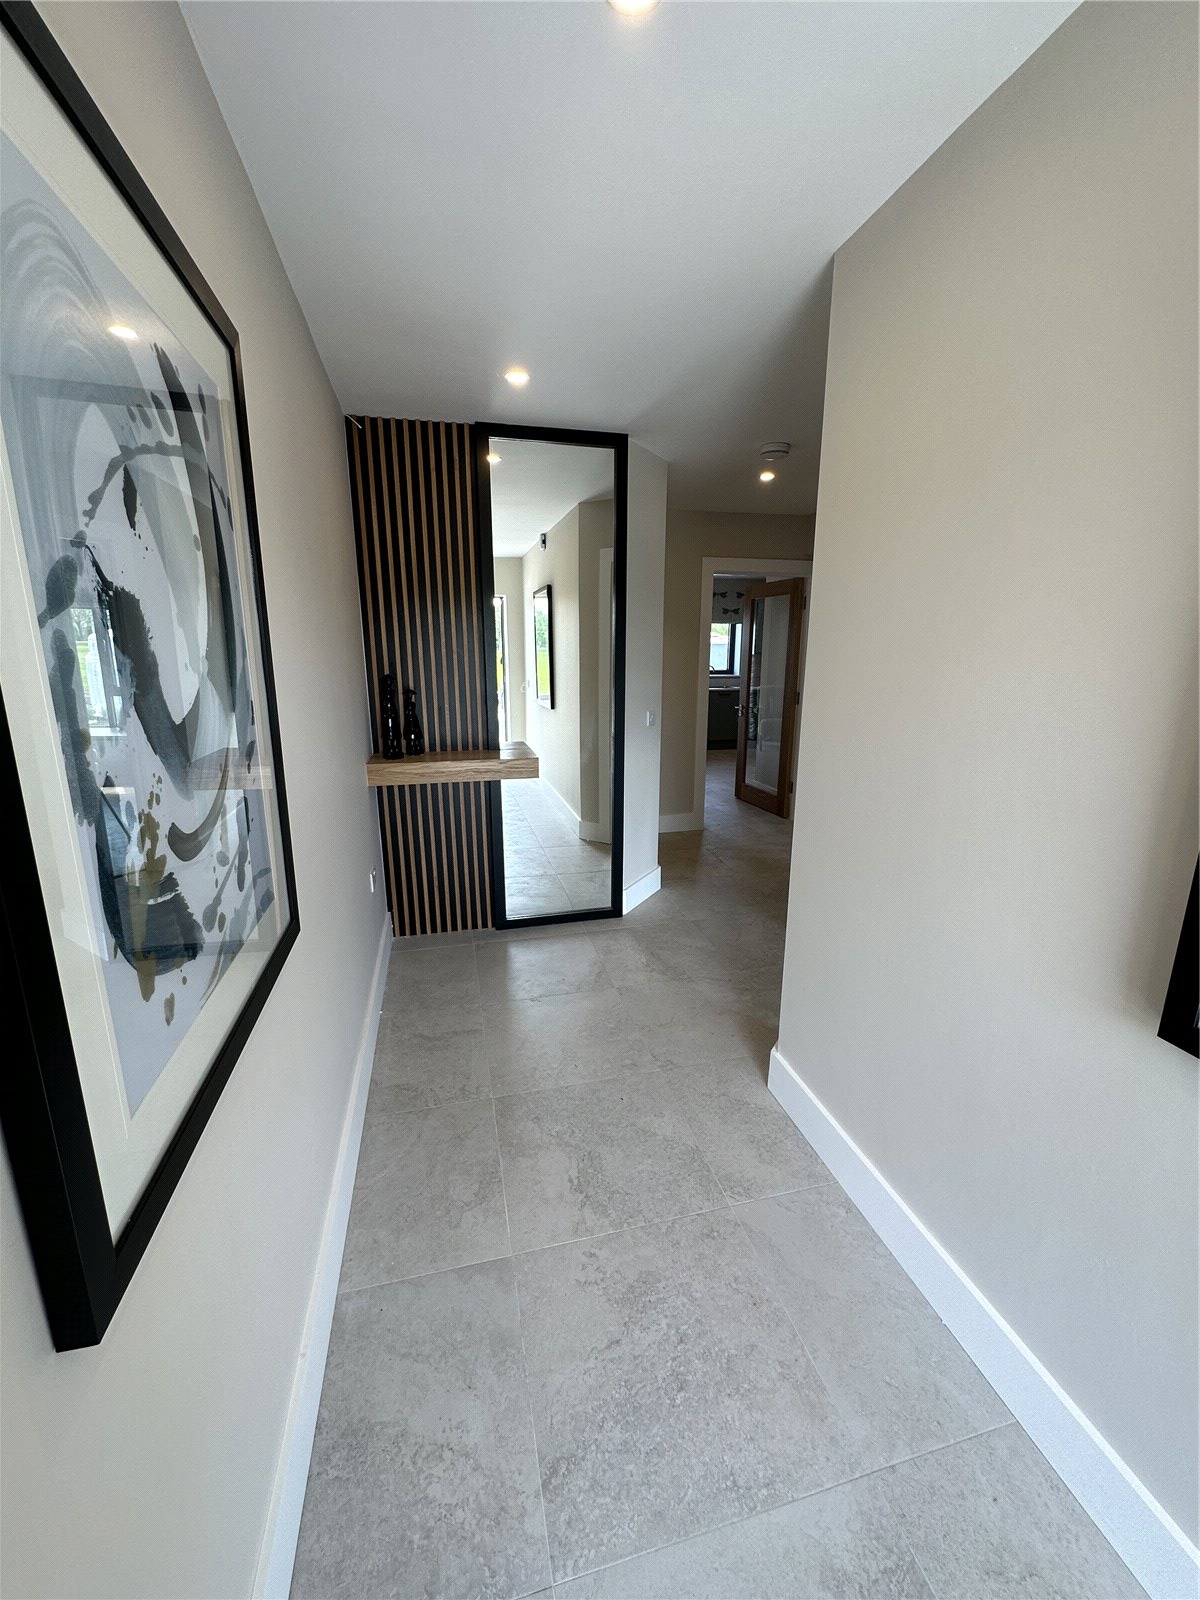 Modern home interior featuring a tiled hallway with framed artwork on the walls, leading to a brightly lit room.